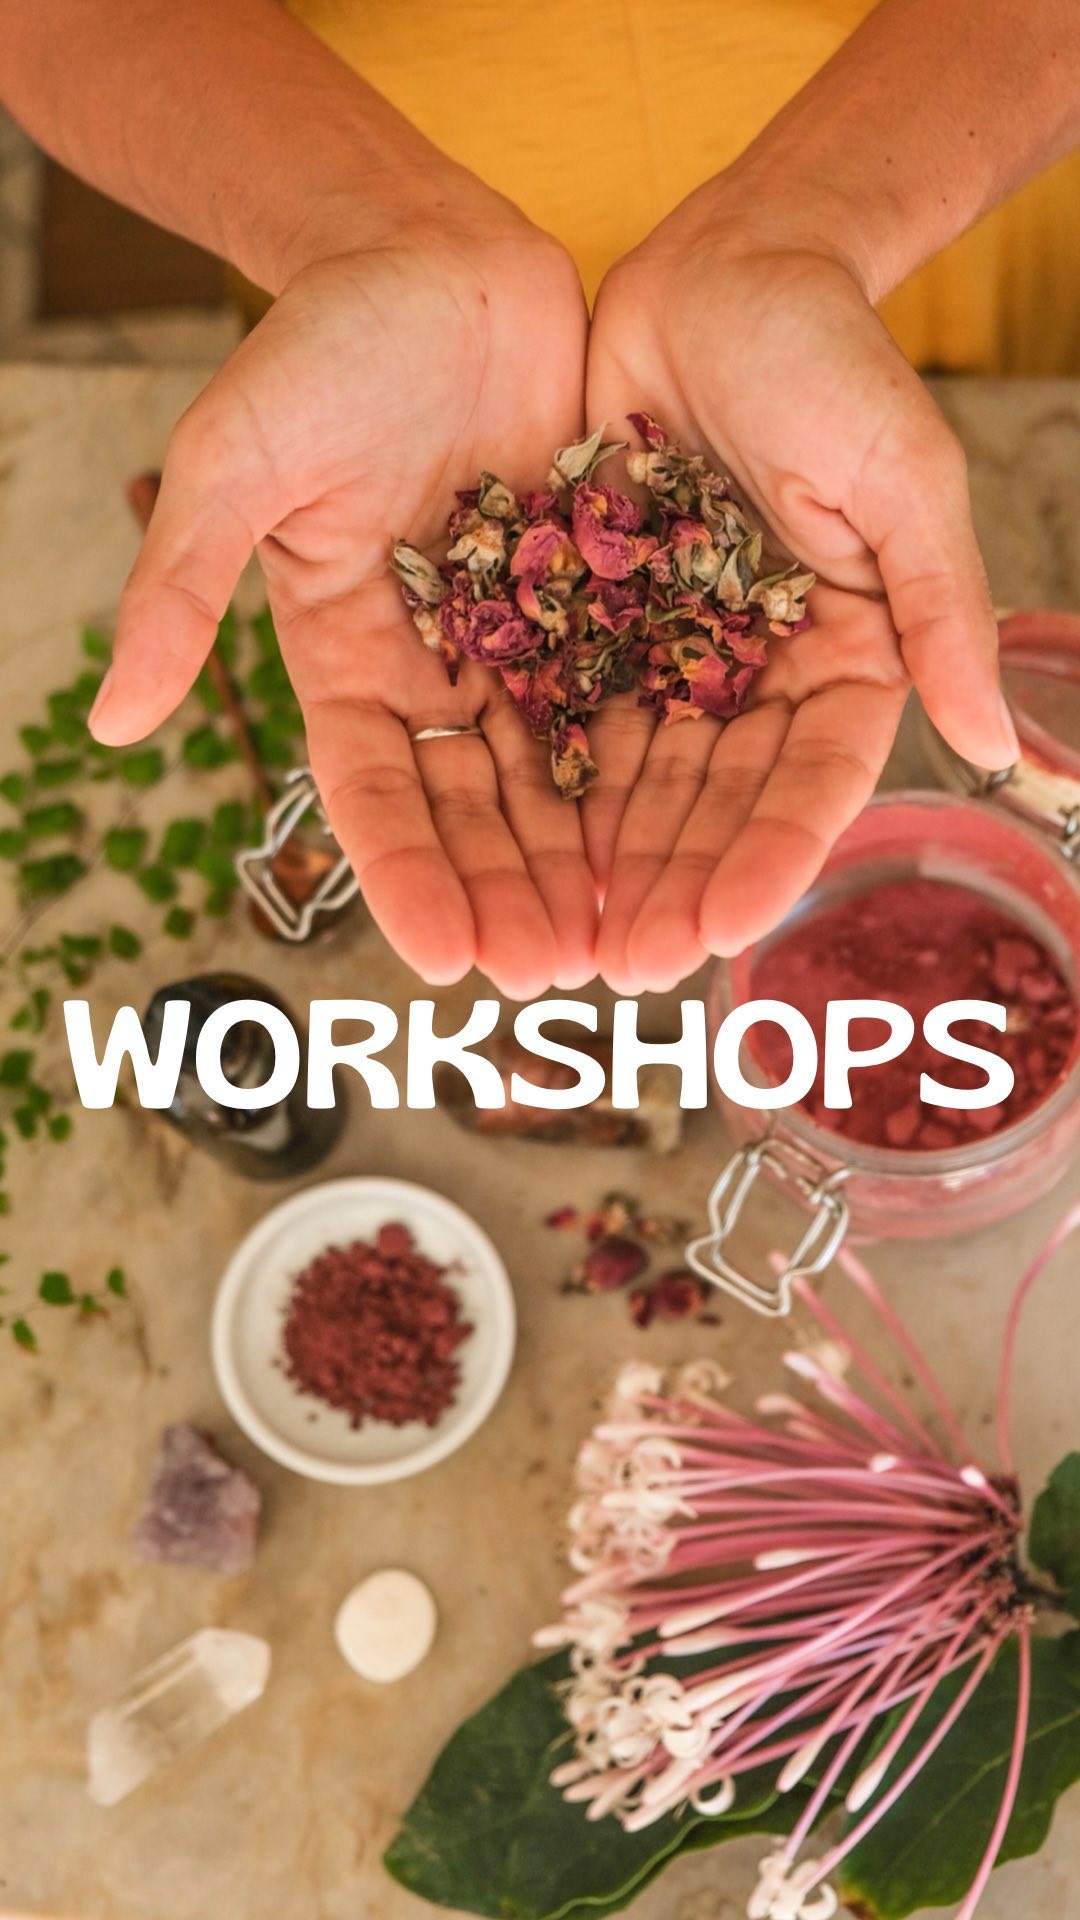 I am back on workshop mode ✨🌱

In-person herbalism workshops are designed to give you specific tools to amplify your knowledge on how to implement plant medicine to heal yourself and your loved ones, everyday, and for the rest of your life. 

My workshops combine theoretical material and hands-on practice. You will learn how to identify plants by how they look, smell and feel. You will also learn how to transform and take those herbs, depending on your needs. You can ask questions and get instant answers, so you can evolve rapidly in your herbalism practice. 

If you are a beginner or a seasoned herbalist that would like to master more skills, my workshop are fun and dense with valuable info.

My next workshop is:

HALLOWEEN + ECLIPSE 
MAGIC CHOCOLATE AND POTIONS MAKING

It’s solar & lunar eclipse + Hallow’s Eve +  Day of the Death season aka Witch season. These are highly powerful times and I would like to share with you fun ways that to tap into that green witch in you and discover herbal magic.

In this hands on workshop we will be making a home made chocolate with superfoods, adaptogens, spices, and a touch of mystery. 

We will also be creating and taking home one of the two following potions:

Cash flow potion: alchemize your own concoction to activate Abundance, Confidence, Self Belief, and Prosperity. 

Love potion: Create your own potion to attract love or (self-love), increase your charm, and spice up your love life.

Both of the potions can be a crystal charged aura mist, a crystal charged aromatherapy roll-on or a crystal charged massage oil.

Learn about the magical properties of aromatherapy and magical herbs, and how to use them in your day to day life to manifest abundance, love and miracles. We will learn about how to incorporate essential oils, flower essences, herbs, flower baths and oracle cards into your daily rituals.

WHEN: Friday the 28th of October 5-7 pm
WHERE: Herbalista Apothecary 1111 Cabarete main street, by Janet super market
ENERGY EXCHANGE: 44 US$, 7 spots available only
Reserve by private message
.
.
.
#herbalismworkshop #herbalism #cabarete